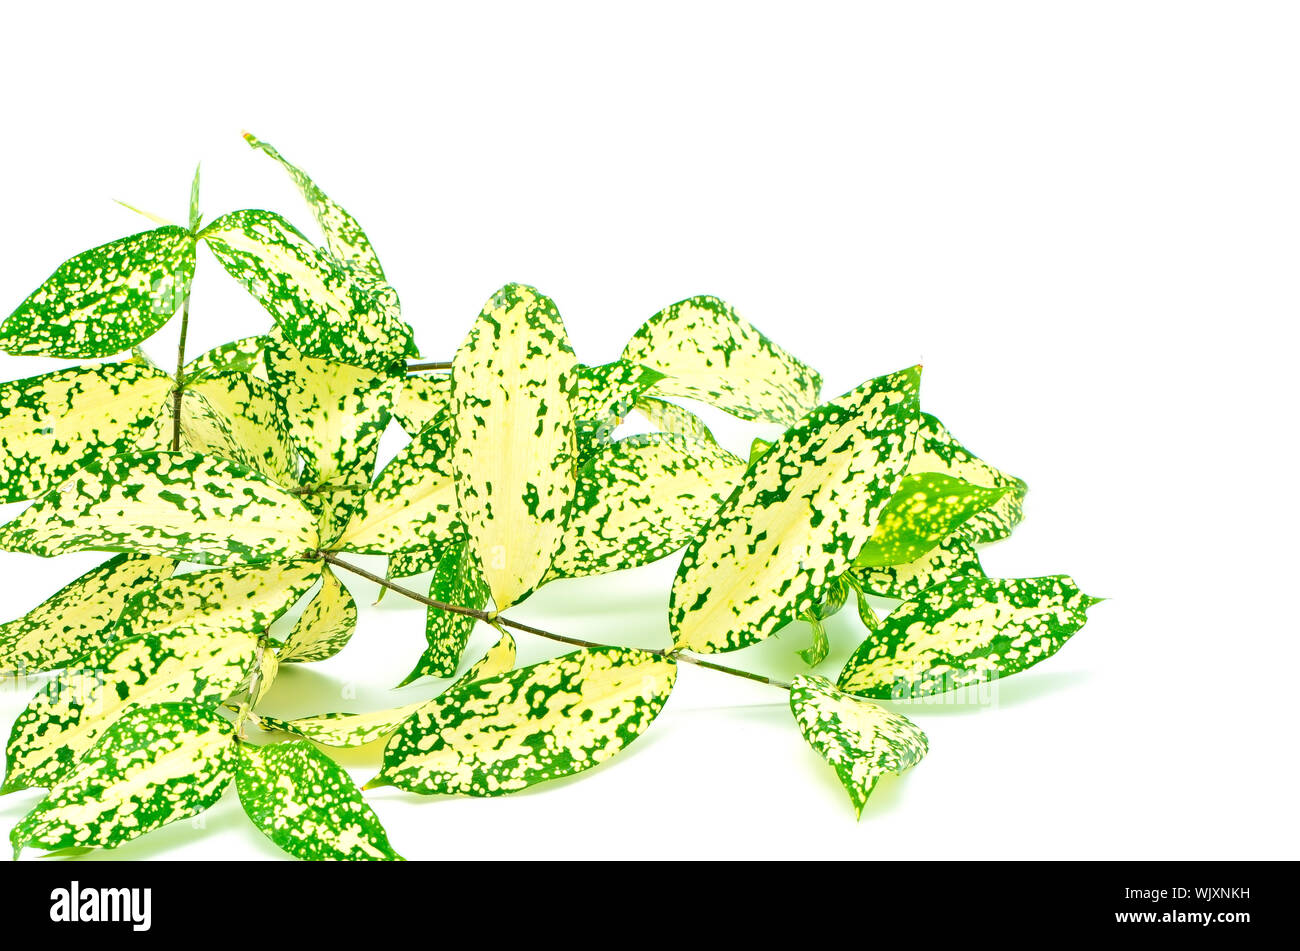 Foliage leaves of dracaena, Gold Dust dracaena or Spotted dracaena, spotted form, isolated on a white background Stock Photo